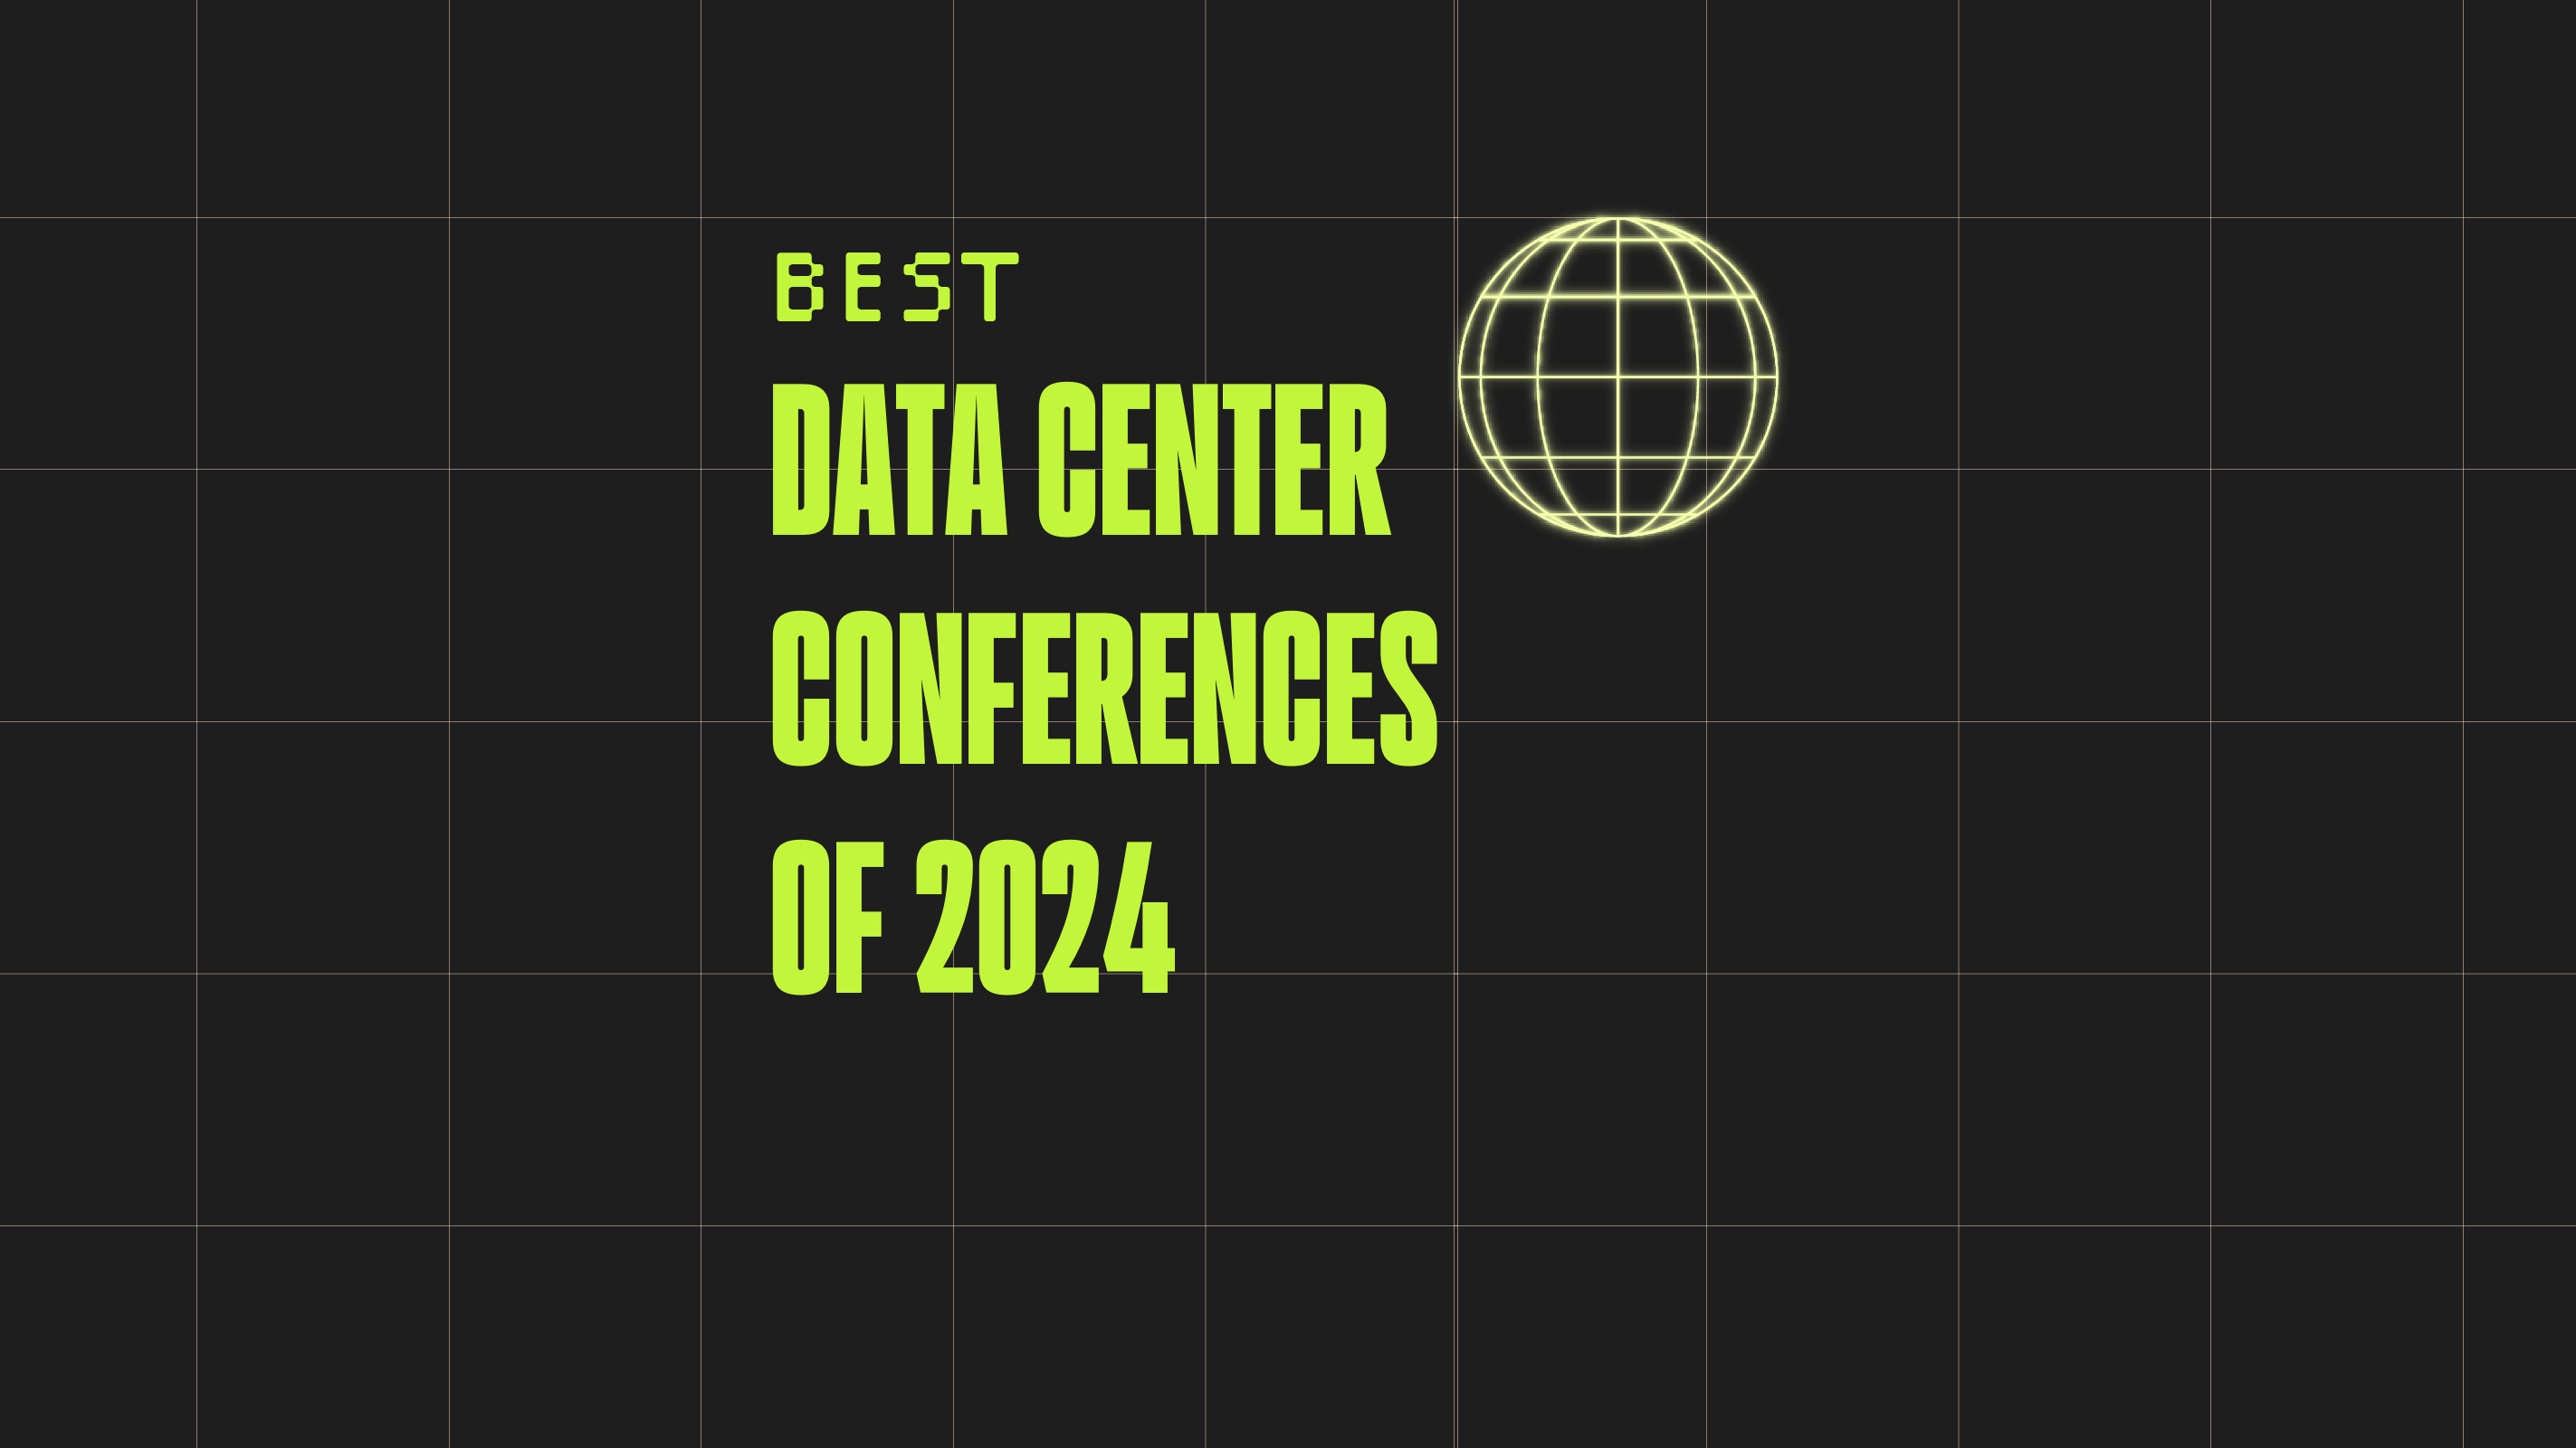 Data center conferences of 2024 best events